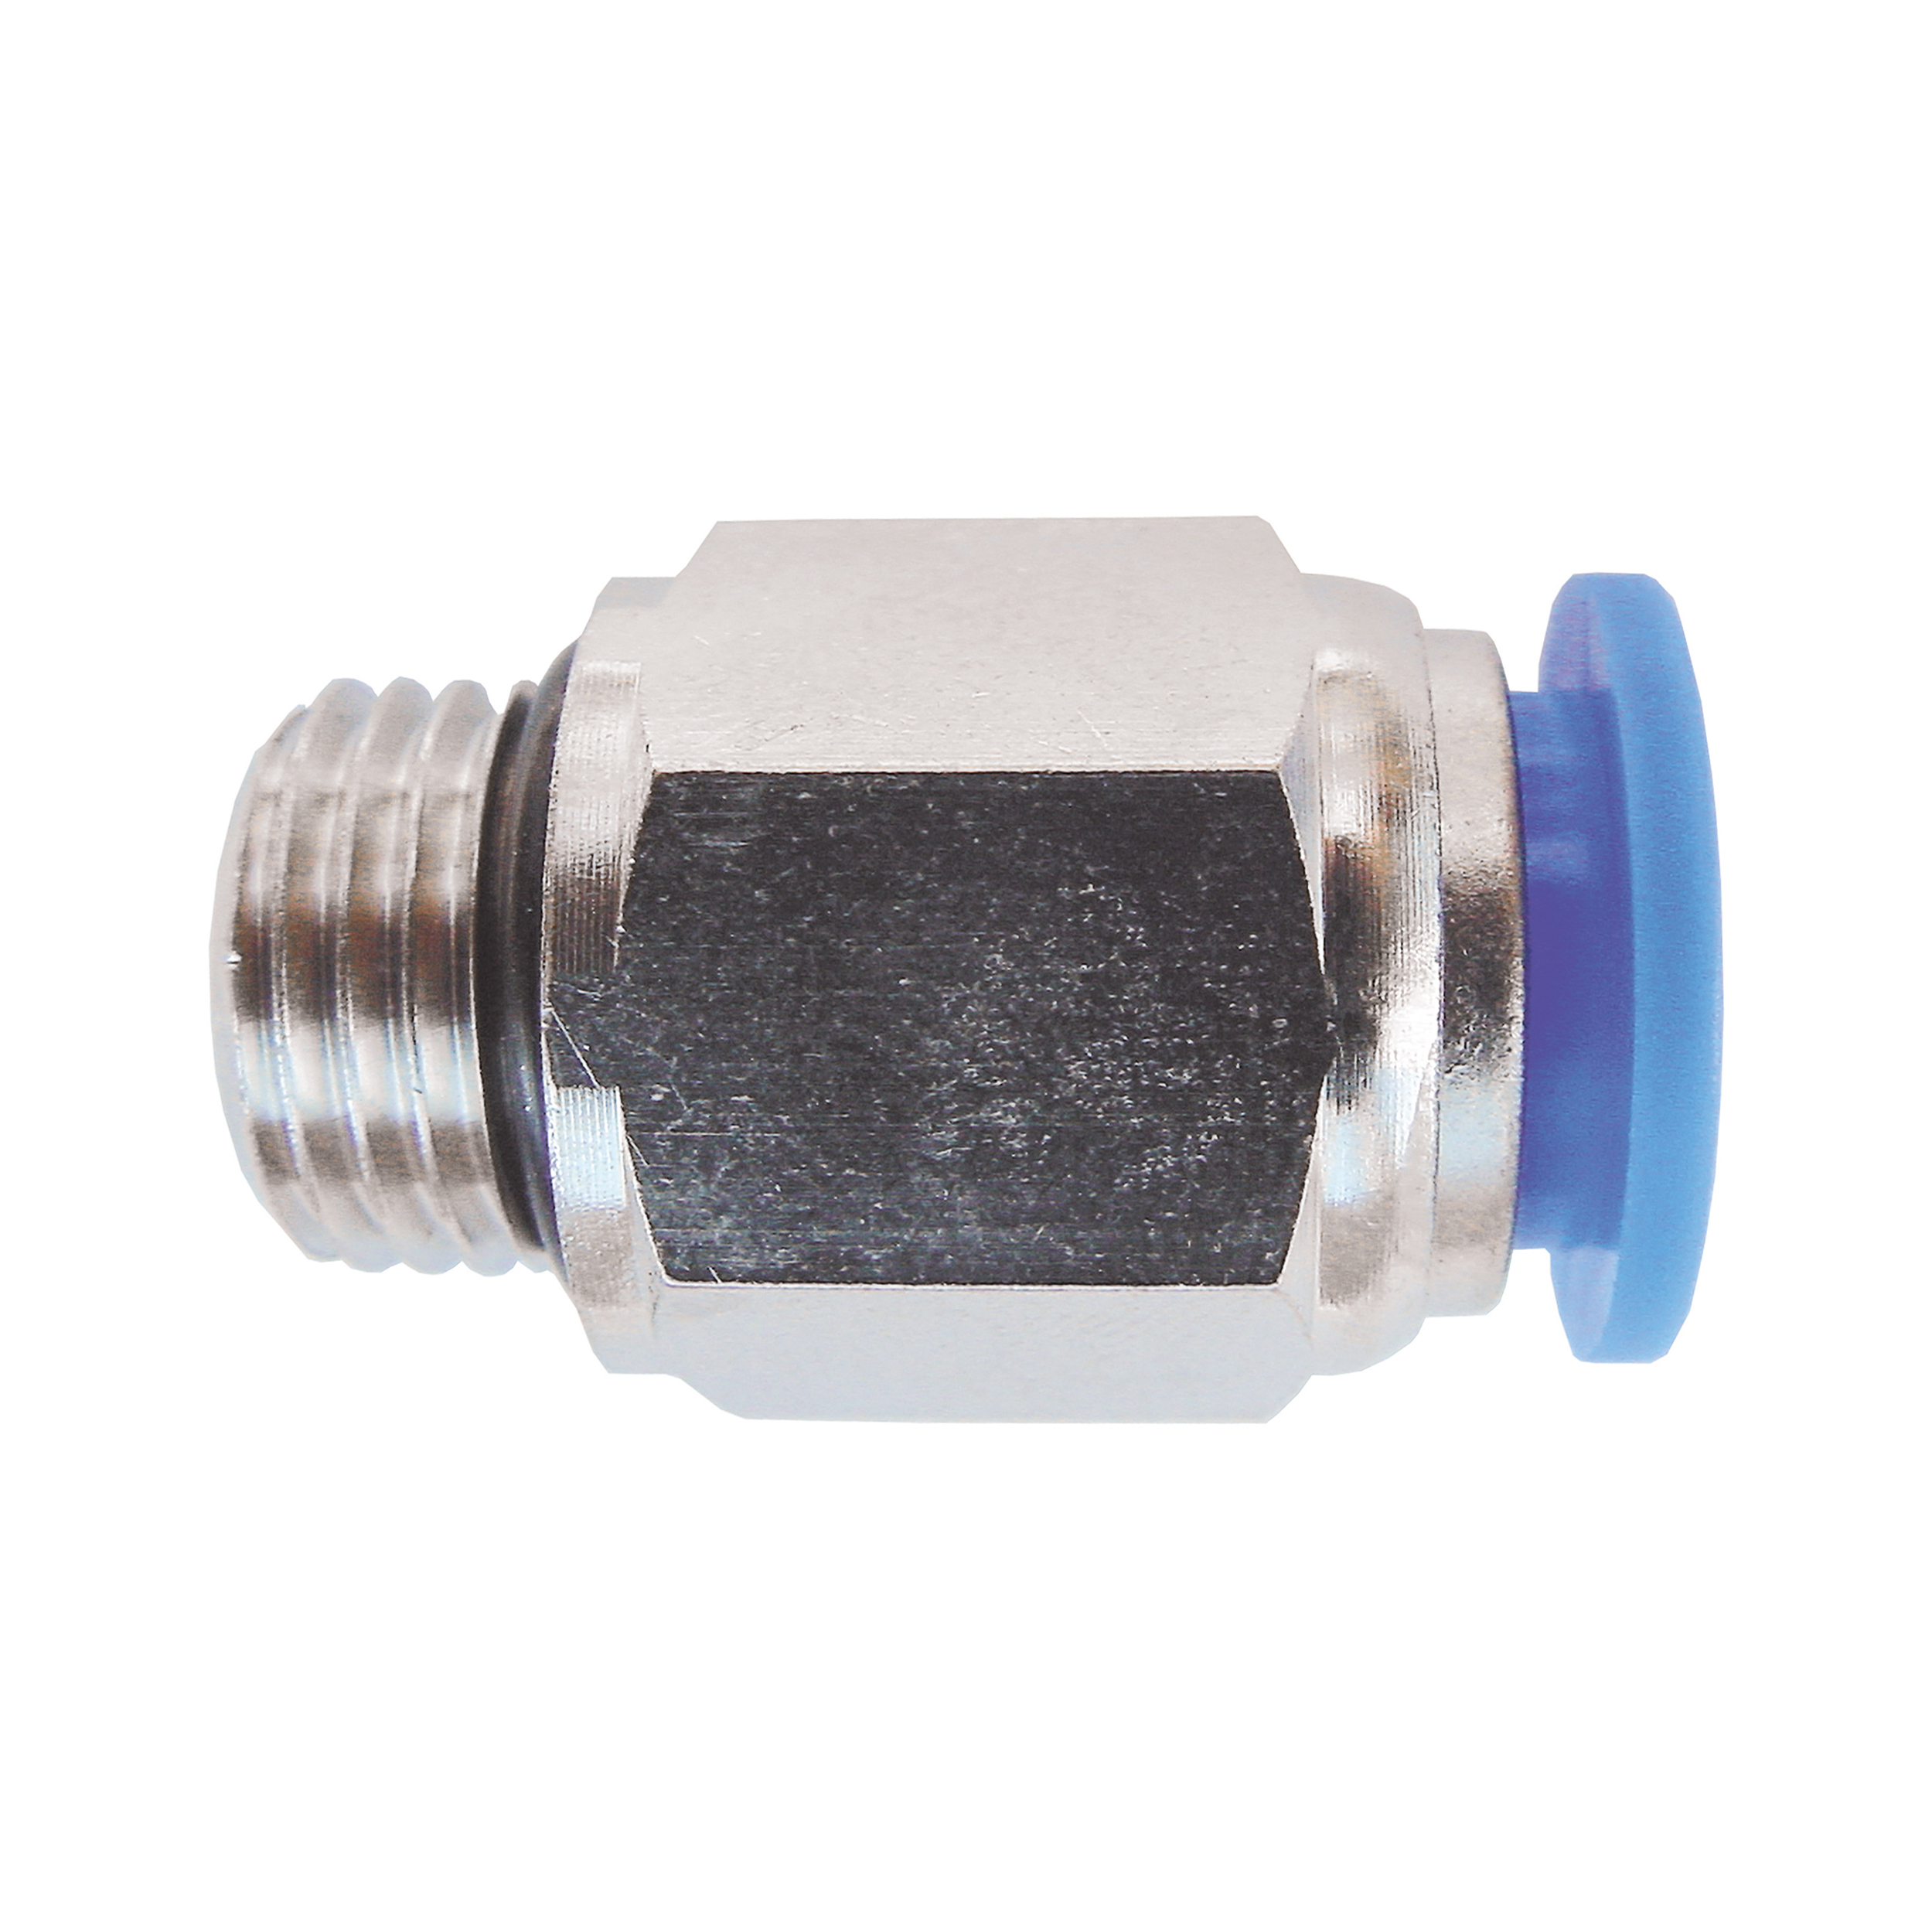 Push-in fitting, G⅛ male, tubing-Ø4 mm, B (length): 19 mm, AF 10 mm, max. operating pressure 145 psi, cylindrical thread w. o-ring